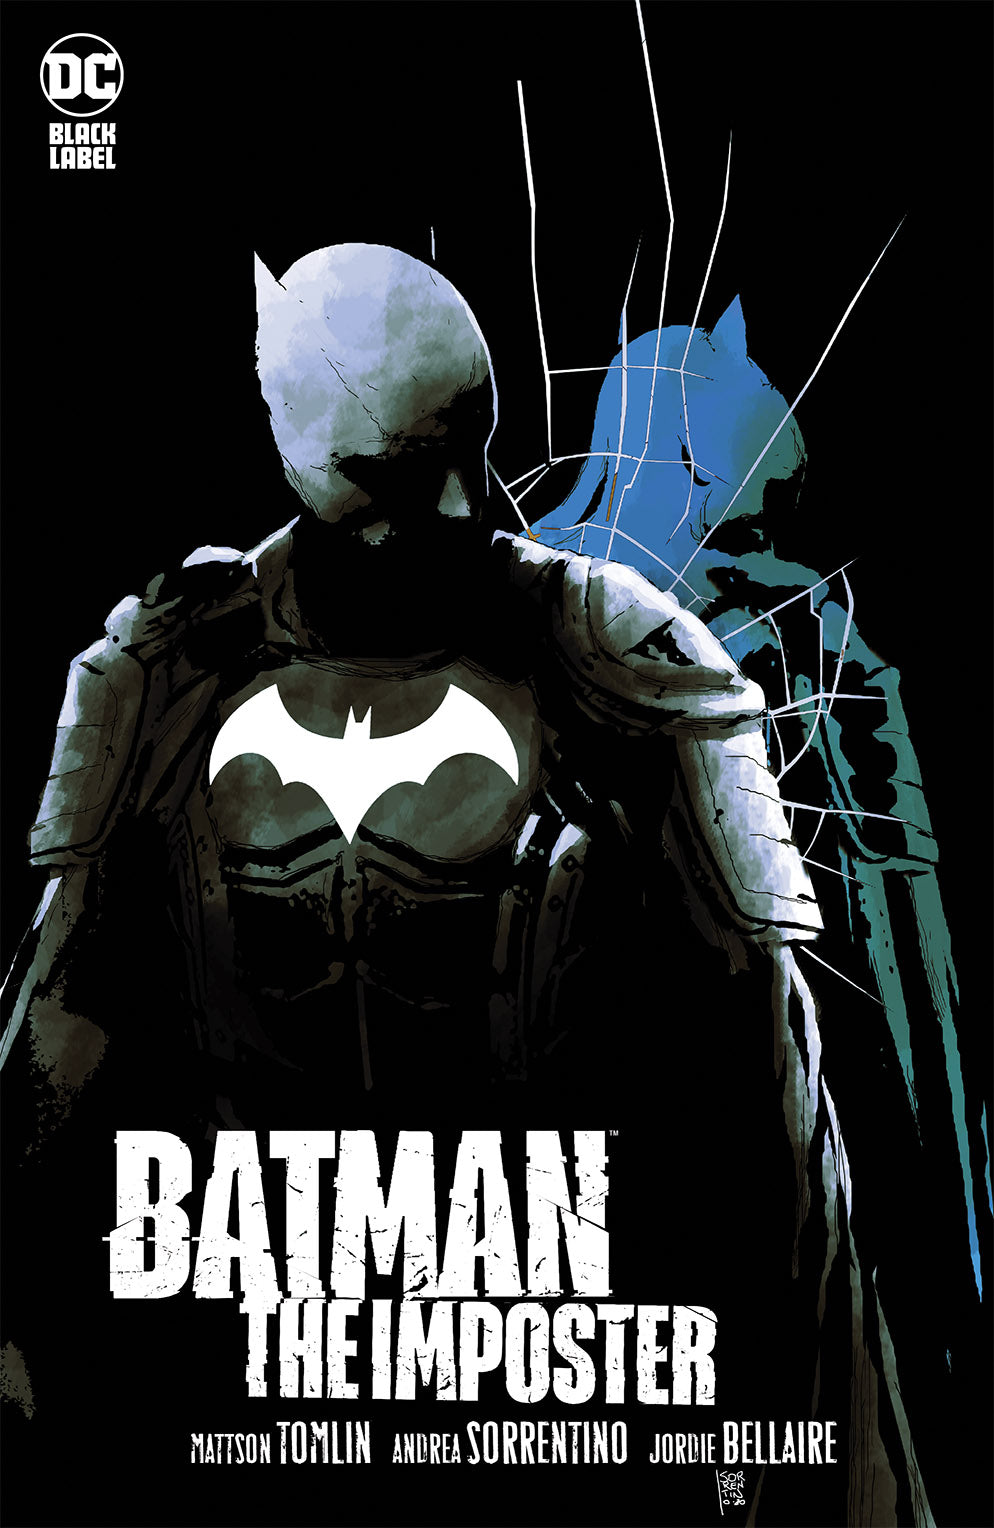 BATMAN THE IMPOSTER HARDCOVER